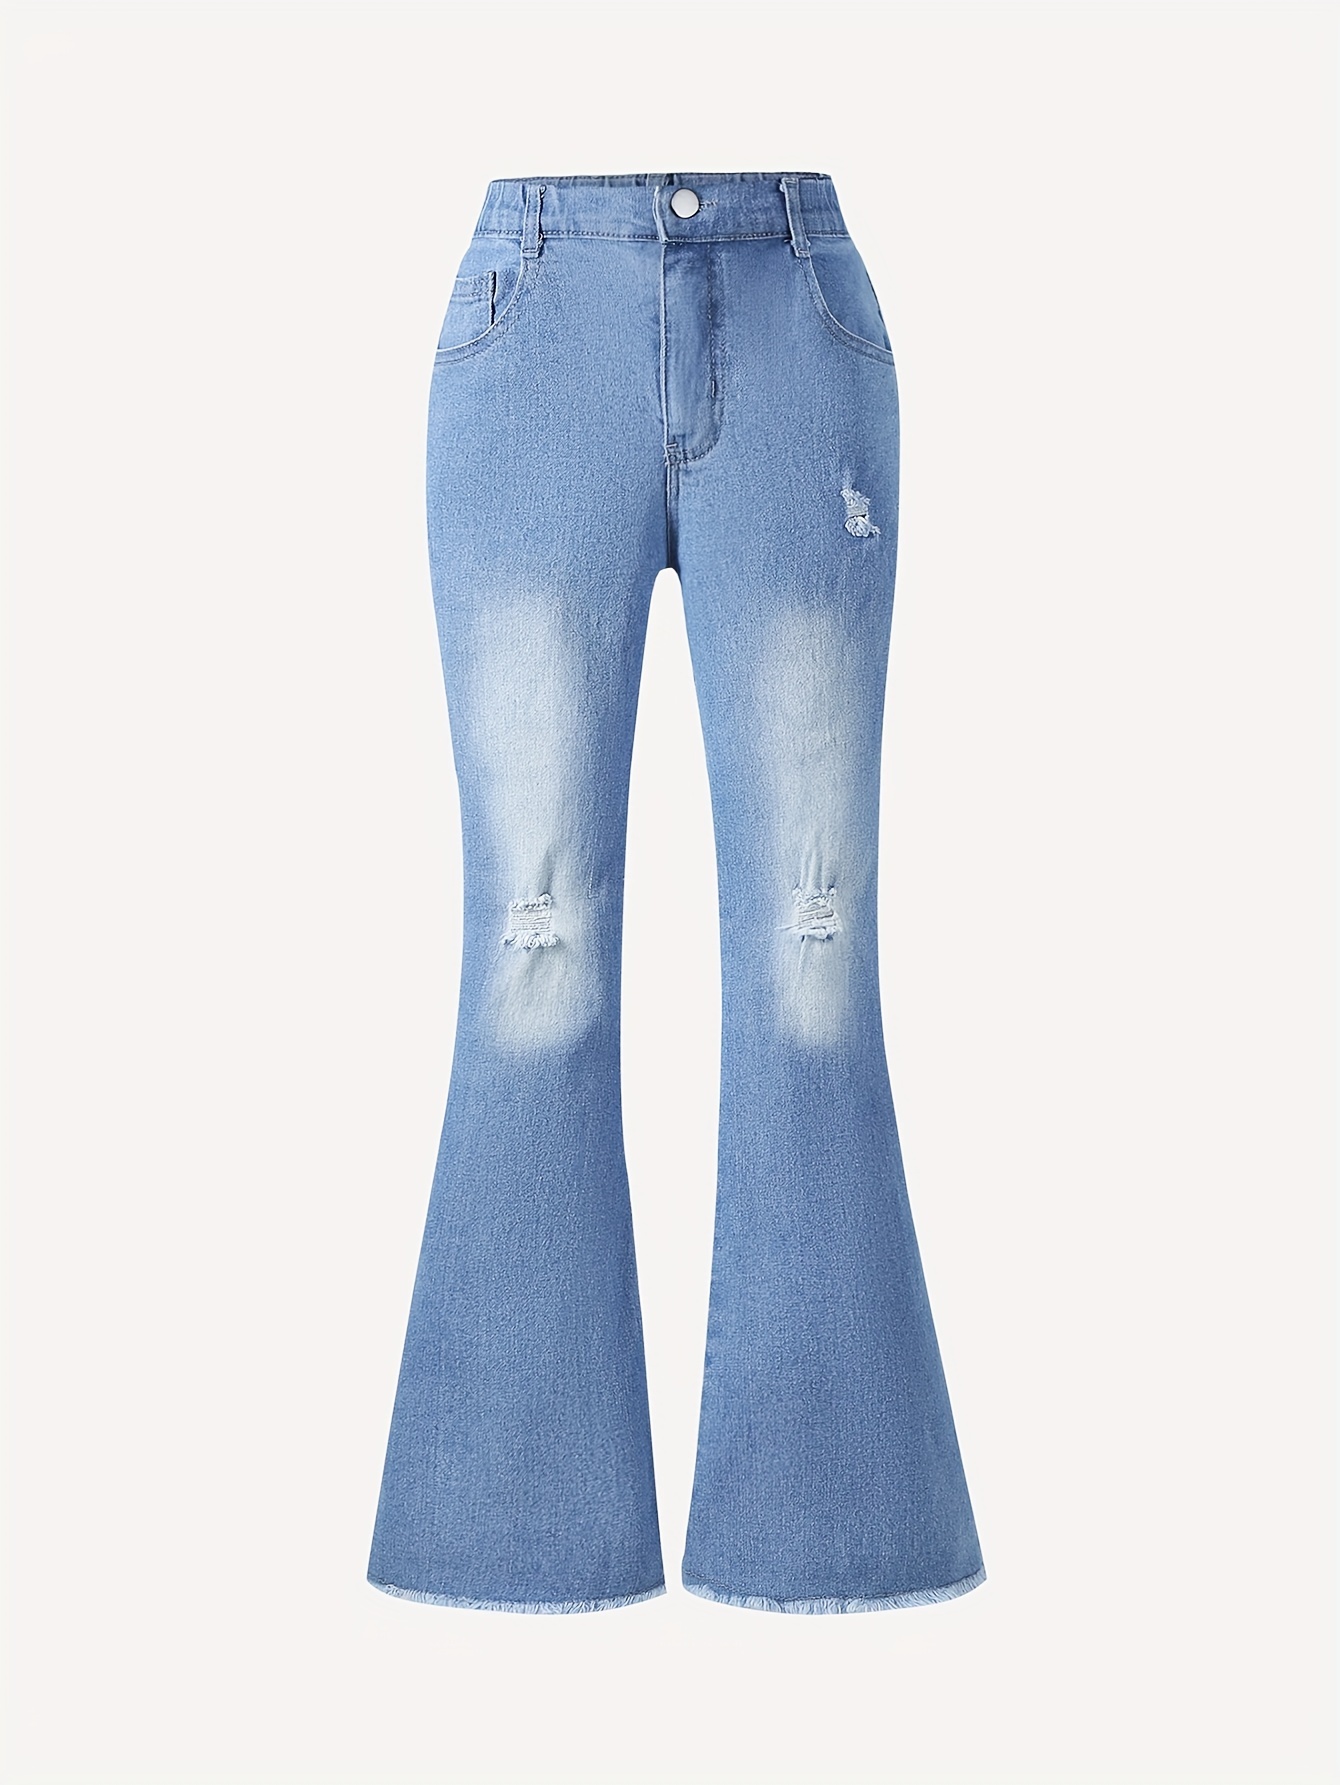 Flare Jeans for Women Stretch Distressed Tie High Waisted Bell Bottom Jeans  Classic Casual Slim Fit Denim Pants 